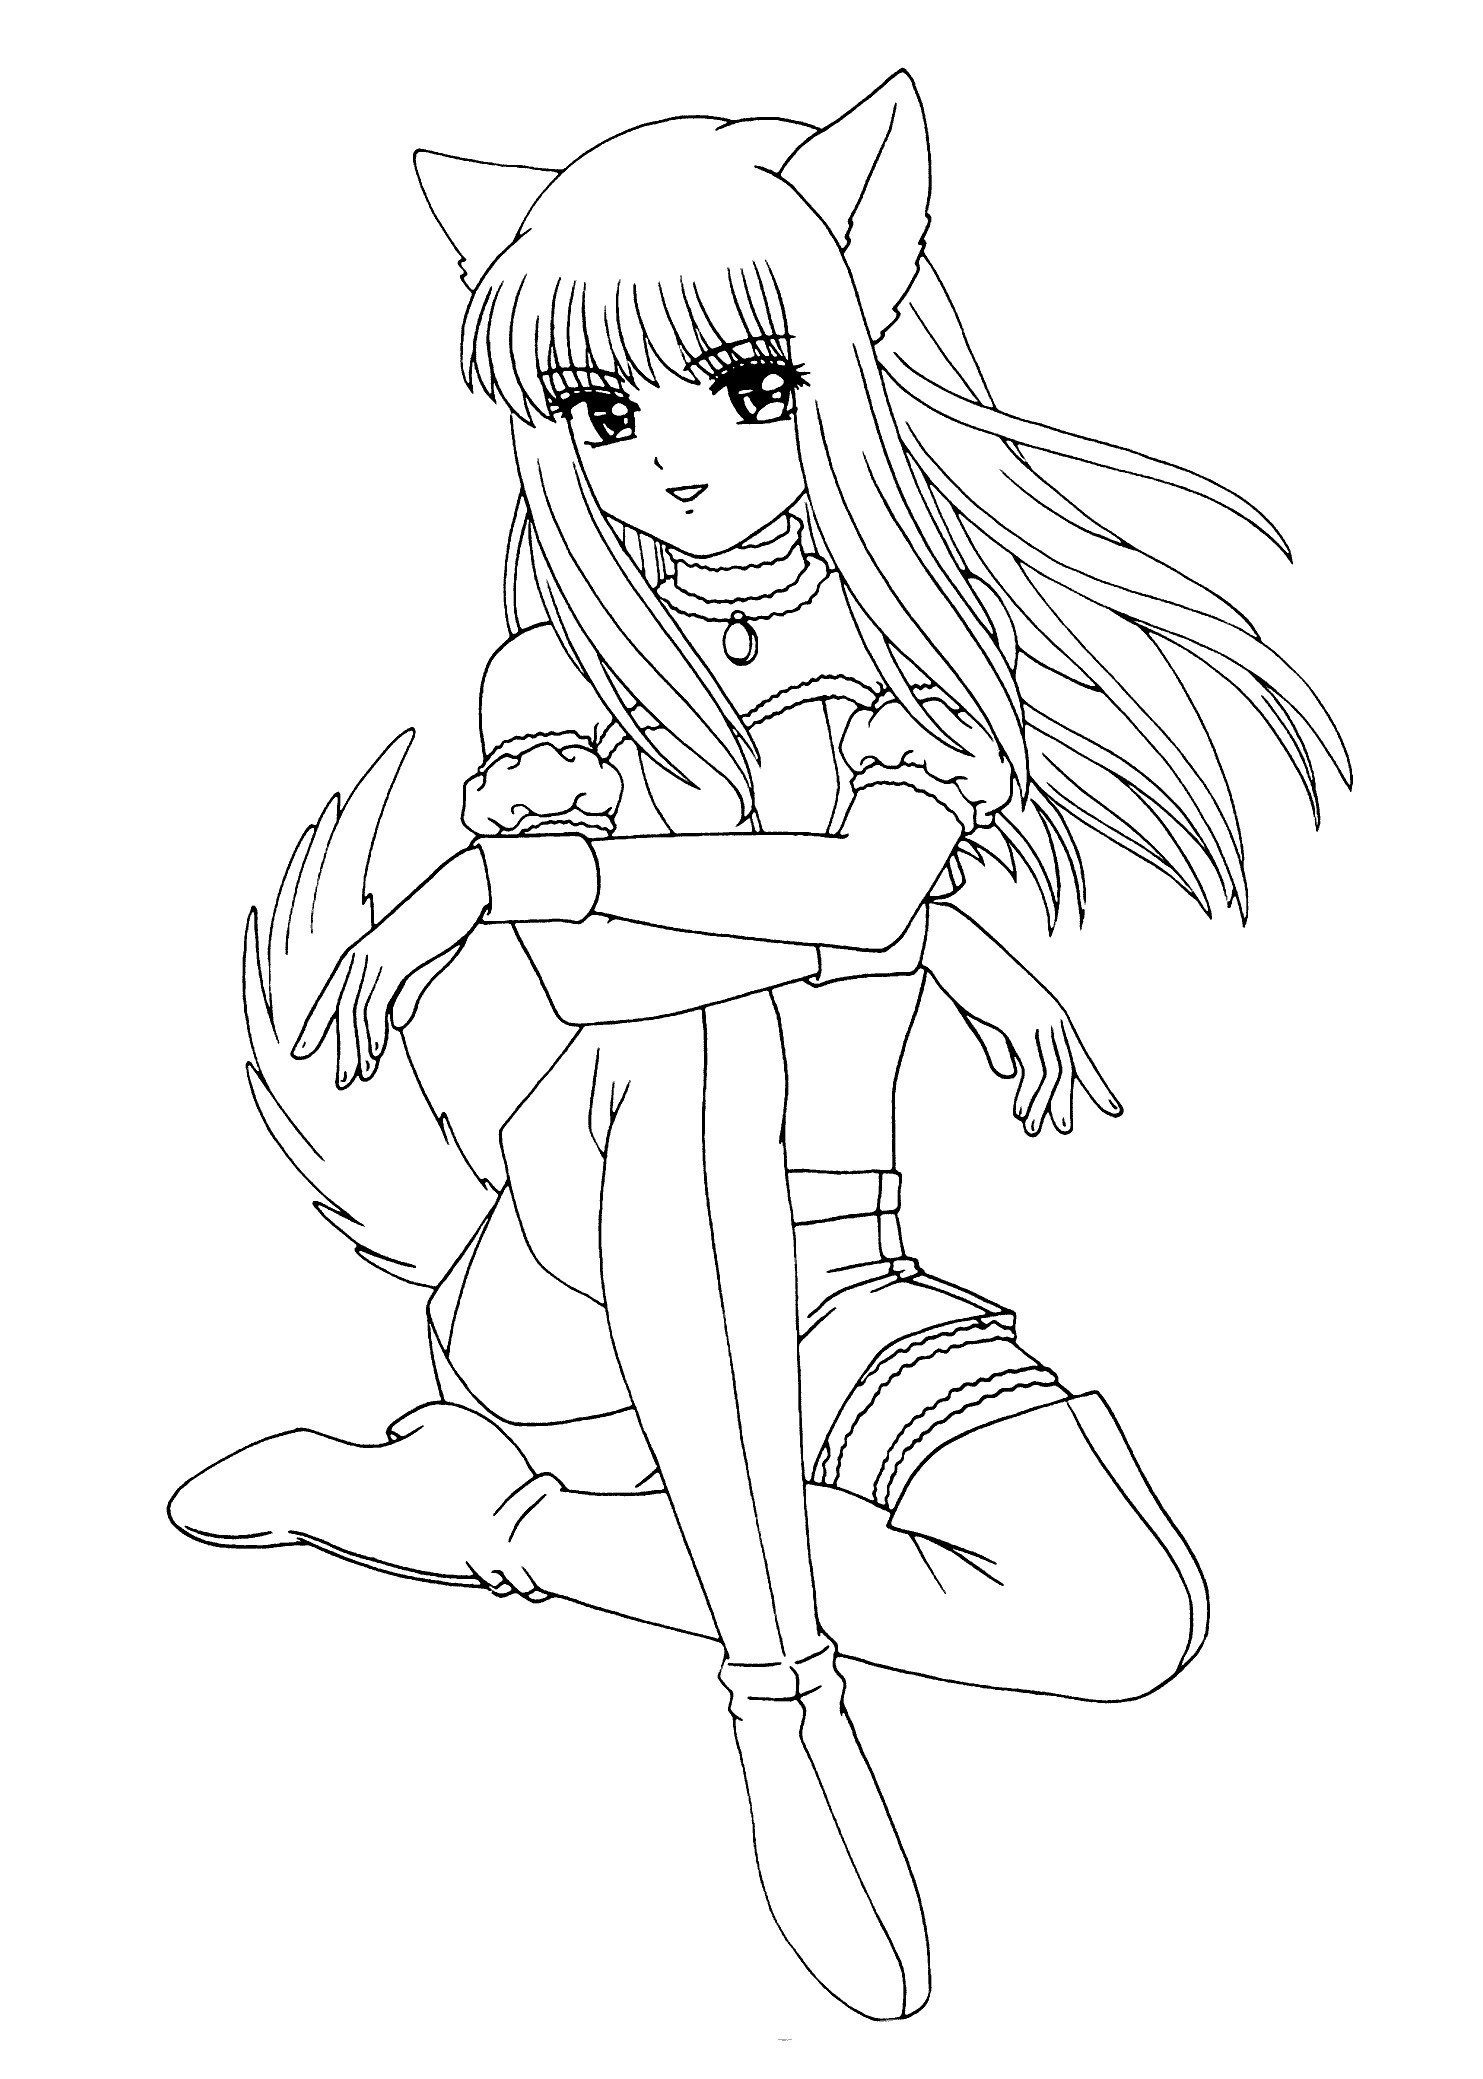 Anime Cat Girl Coloring Pages
 Anime Cat Girl Coloring Pages To Print Coloring Pages